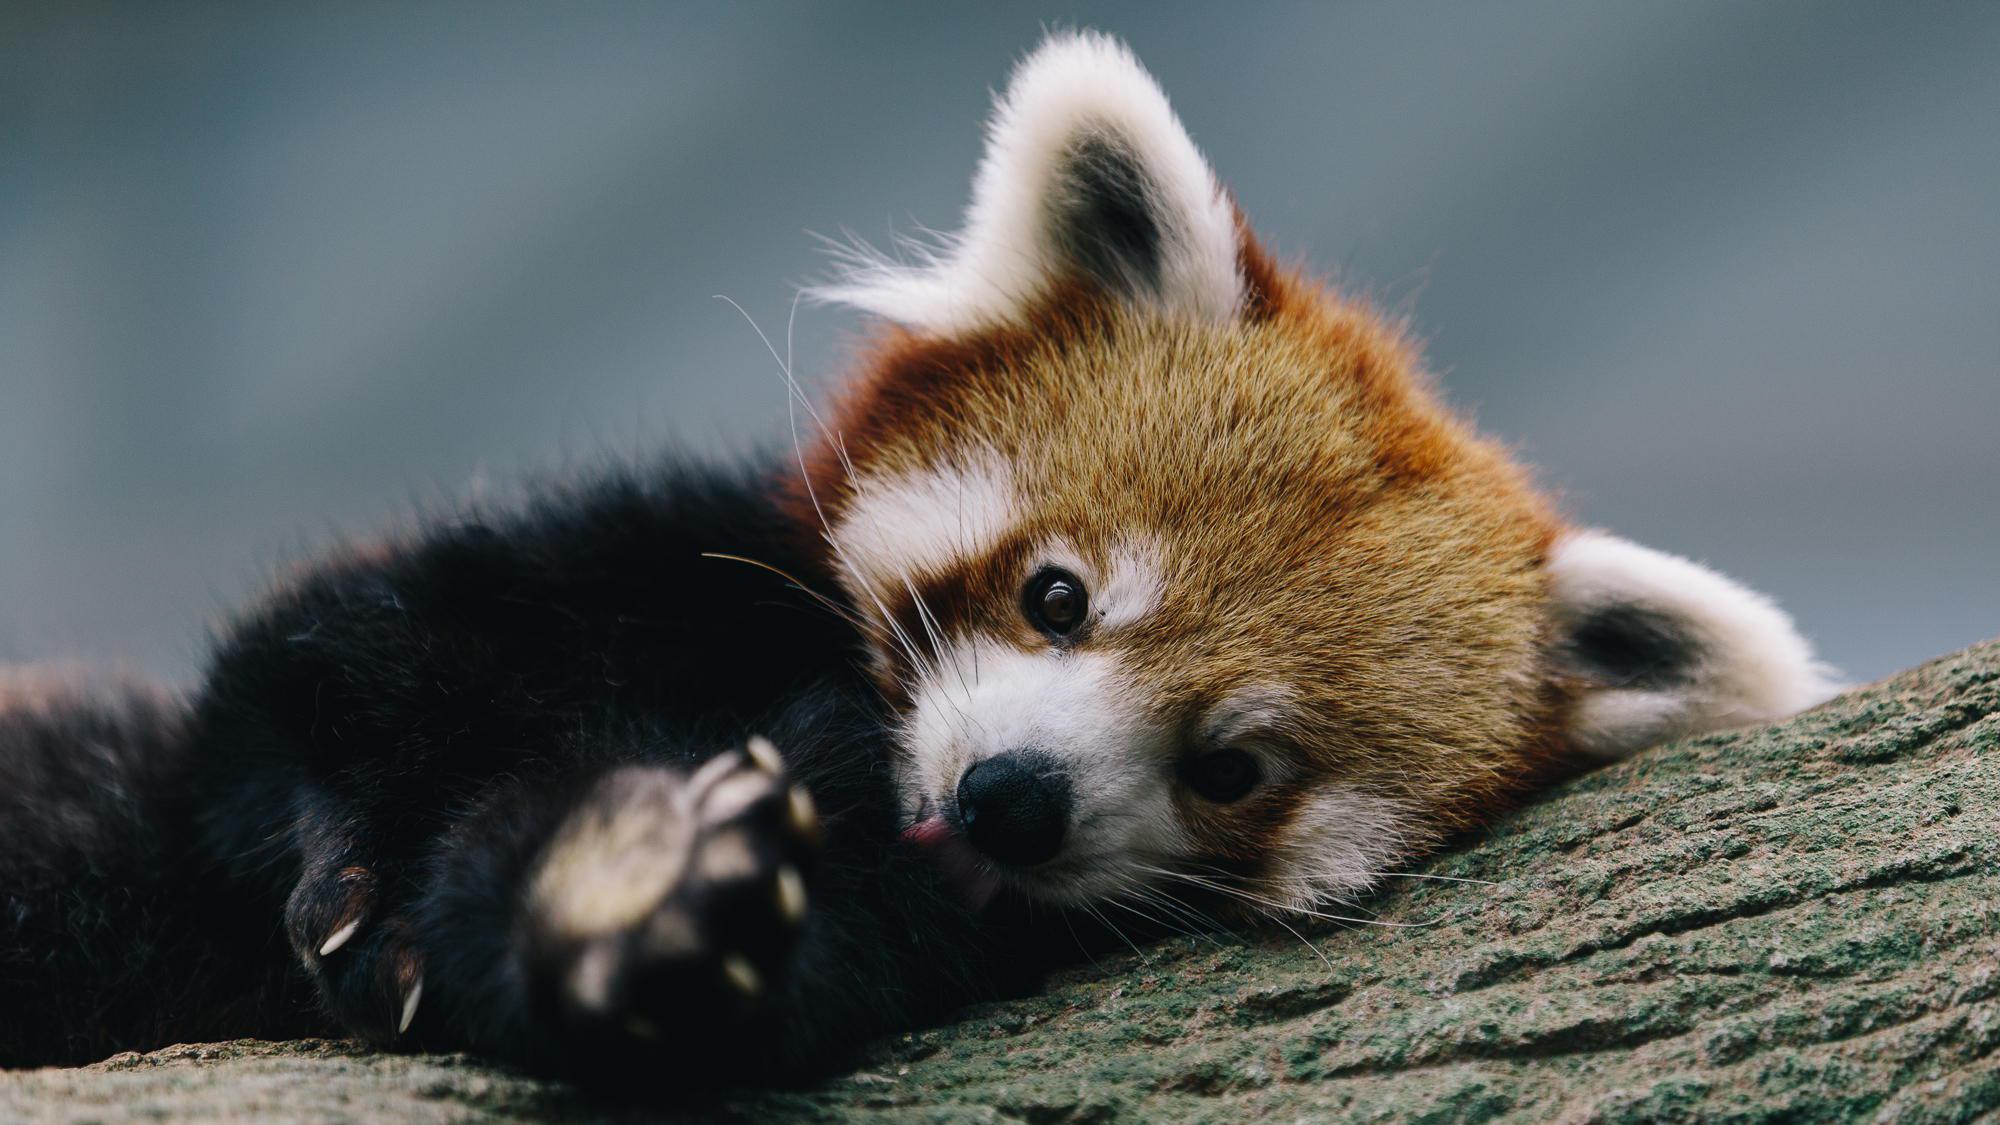 Free download Gallery For gt Red Pandas Wallpaper [2000x1125] for your Desktop, Mobile & Tablet. Explore Red Panda Wallpaper. Red Panda Wallpaper HD, Panda HD Wallpaper, Cute Red Panda Wallpaper